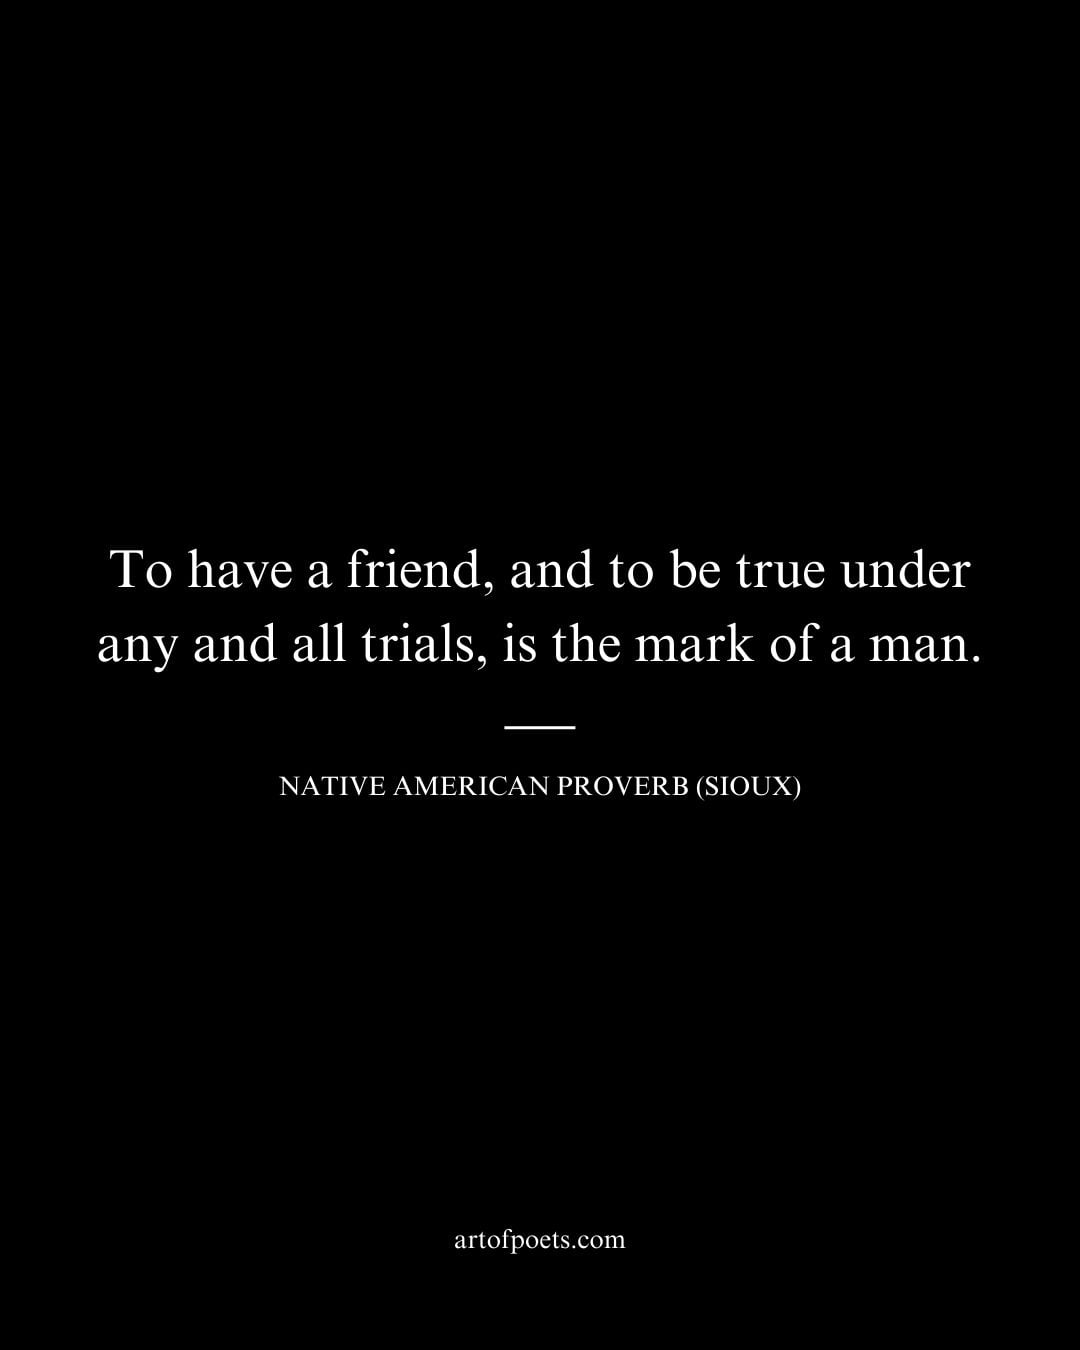 To have a friend and to be true under any and all trials is the mark of a man